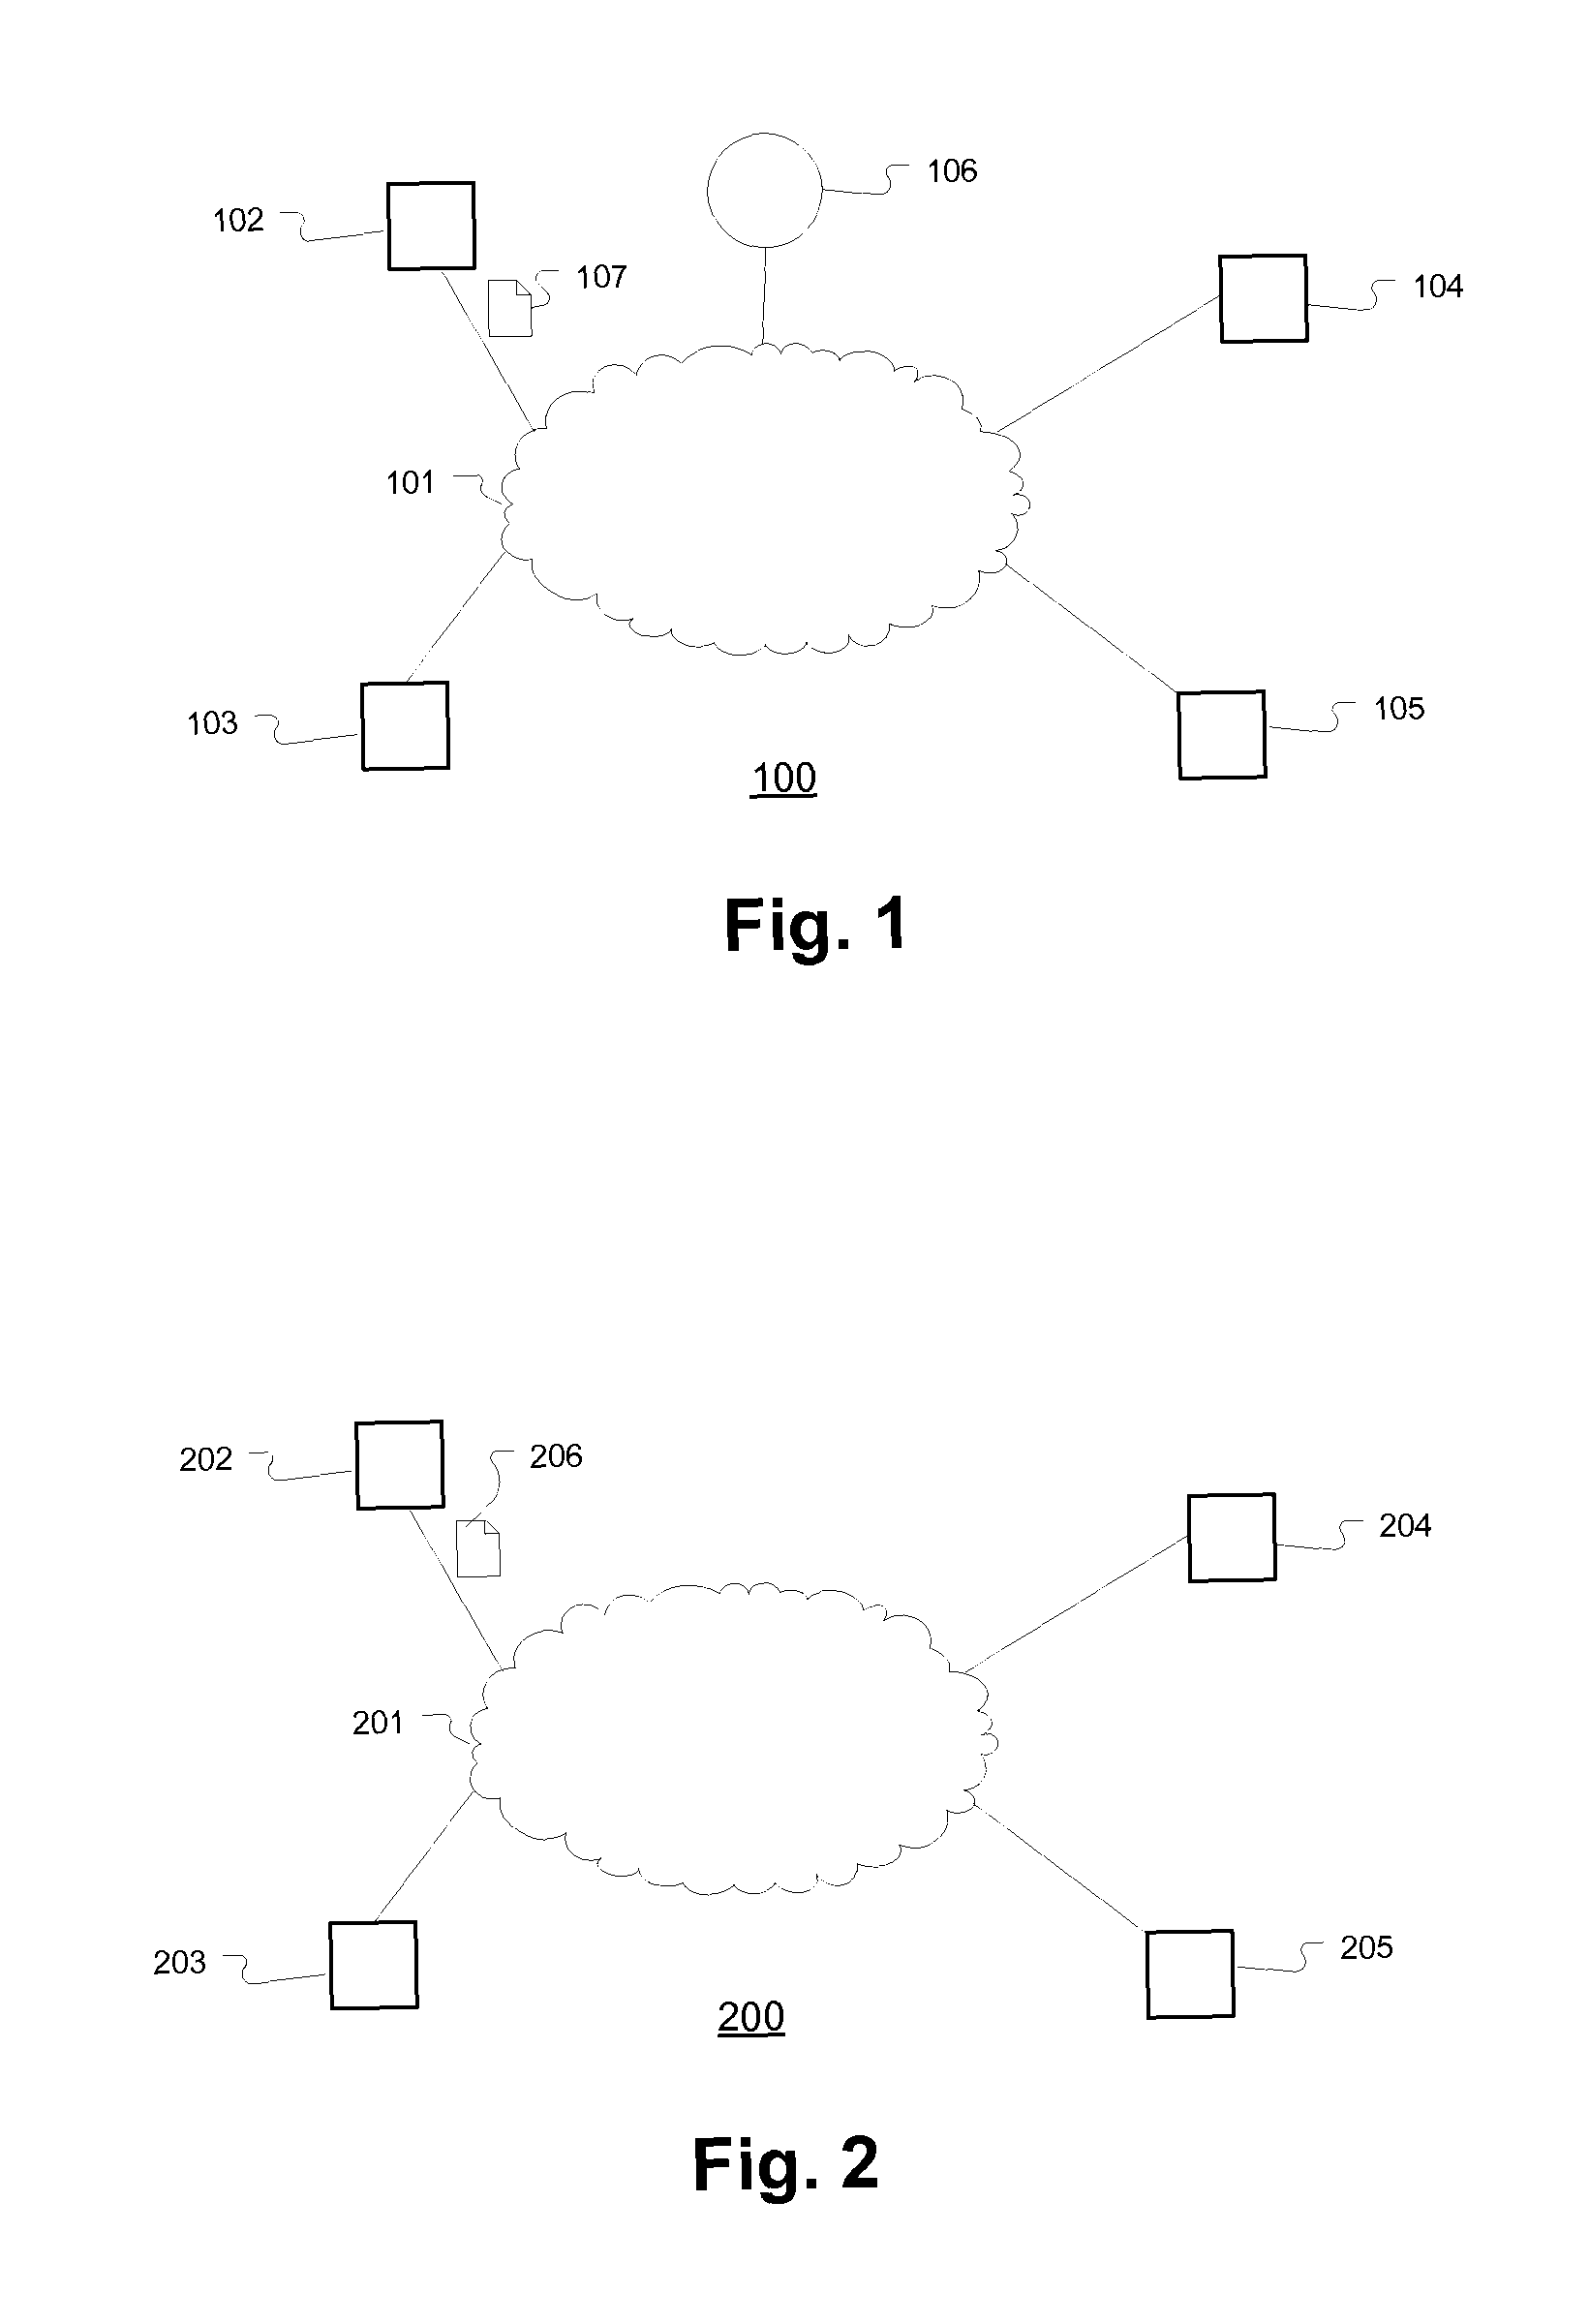 Messaging system with distributed filtering modules which register interests, remove any messages that do not match the registered interest, and forward any matched messages for delivery